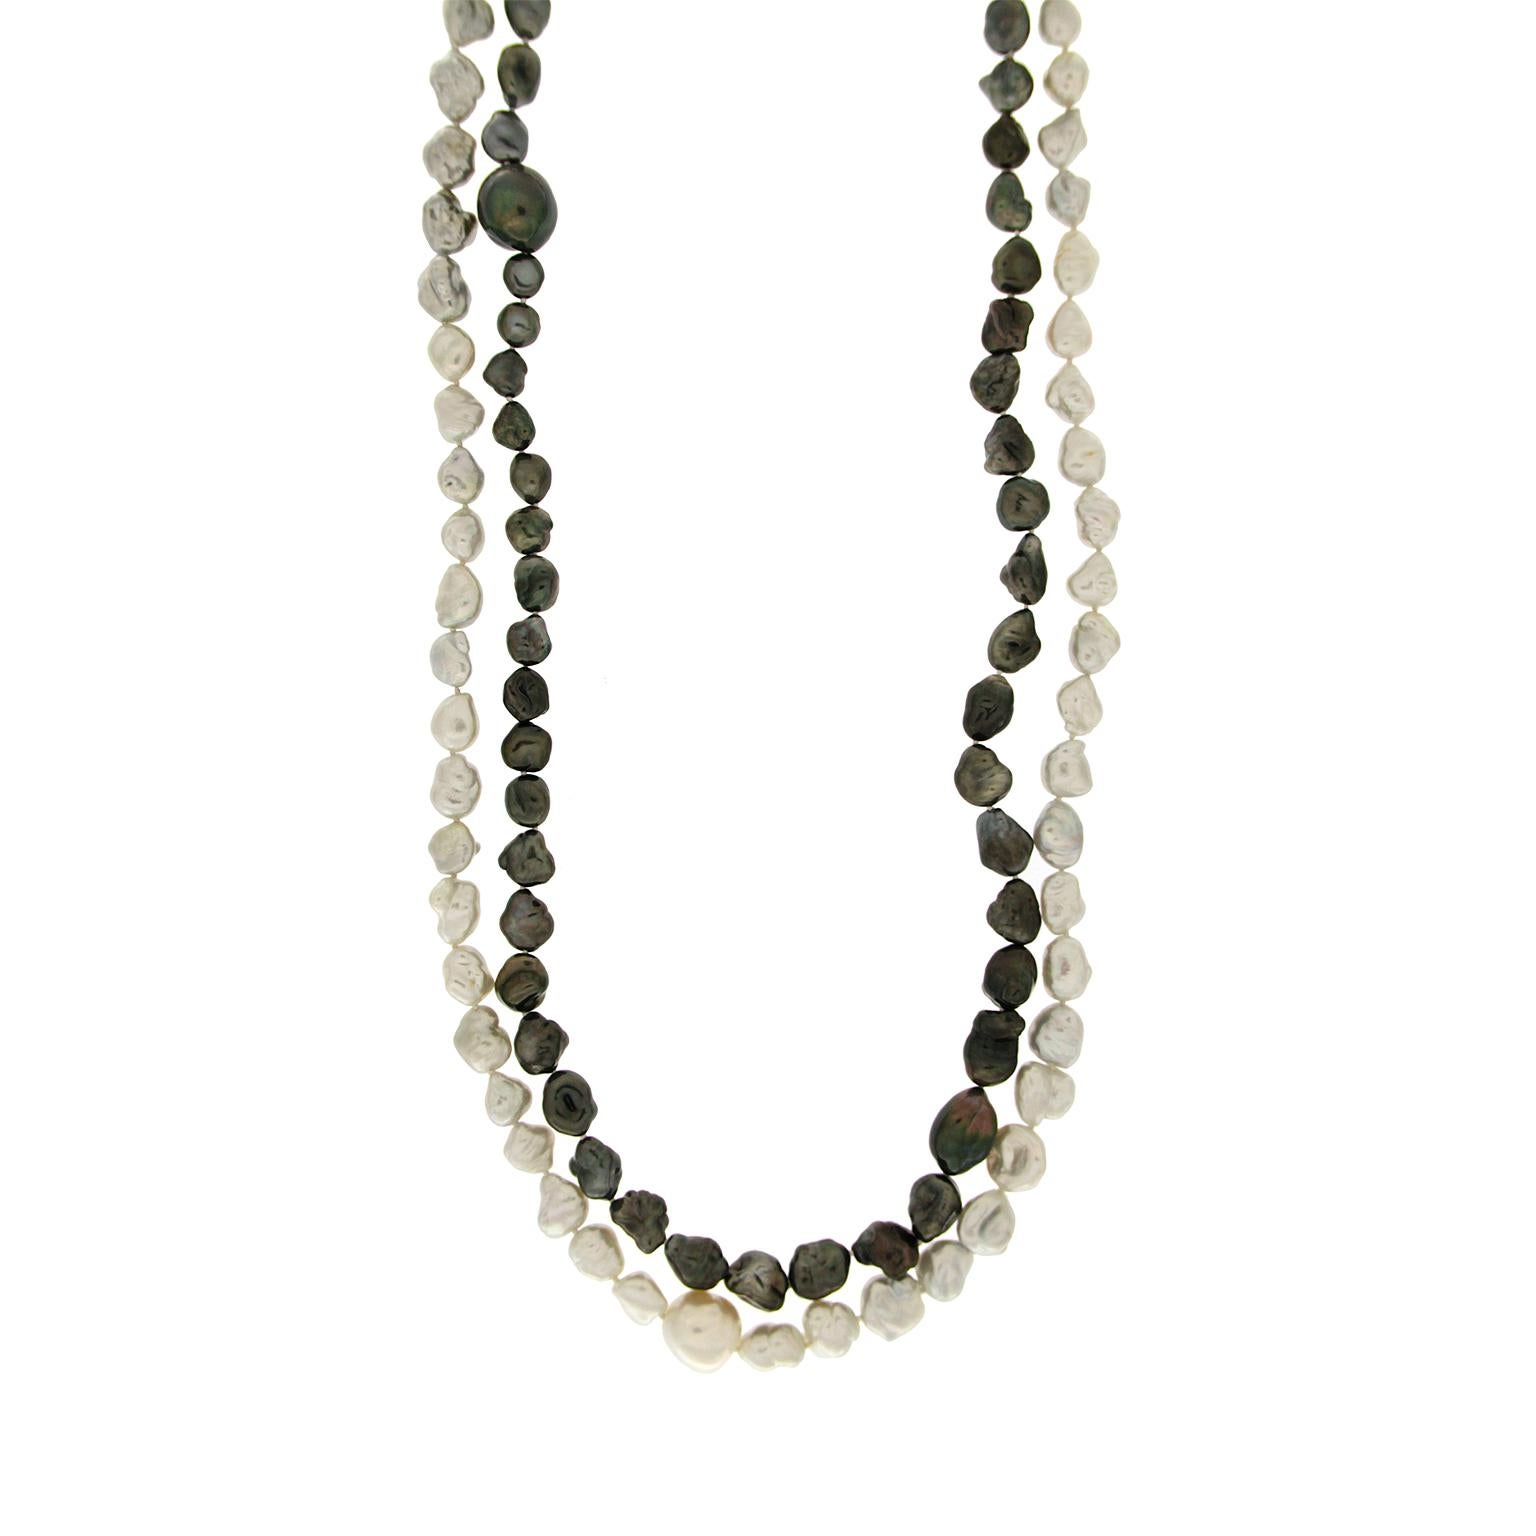 Women's Valentin Magro Black and White, Large and Small Keshi Pearl Necklace